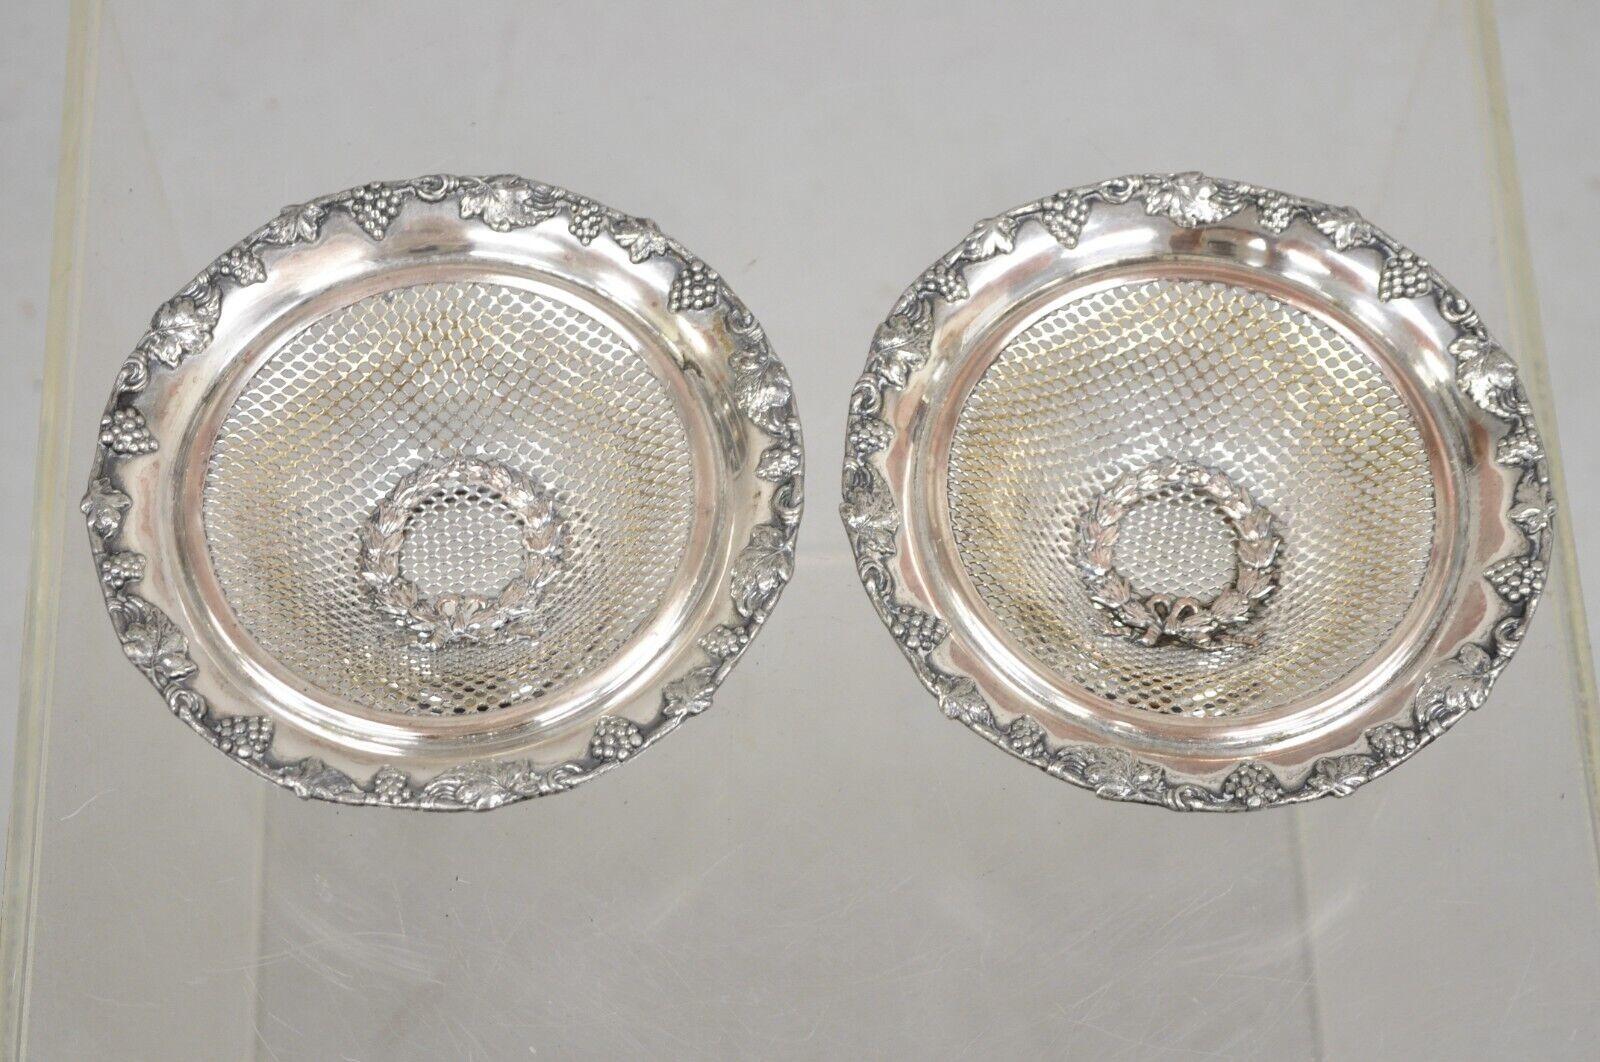 English Edwardian Silver Plated Wreath Design Small Mesh Basket Candy Dish -Pair In Good Condition For Sale In Philadelphia, PA